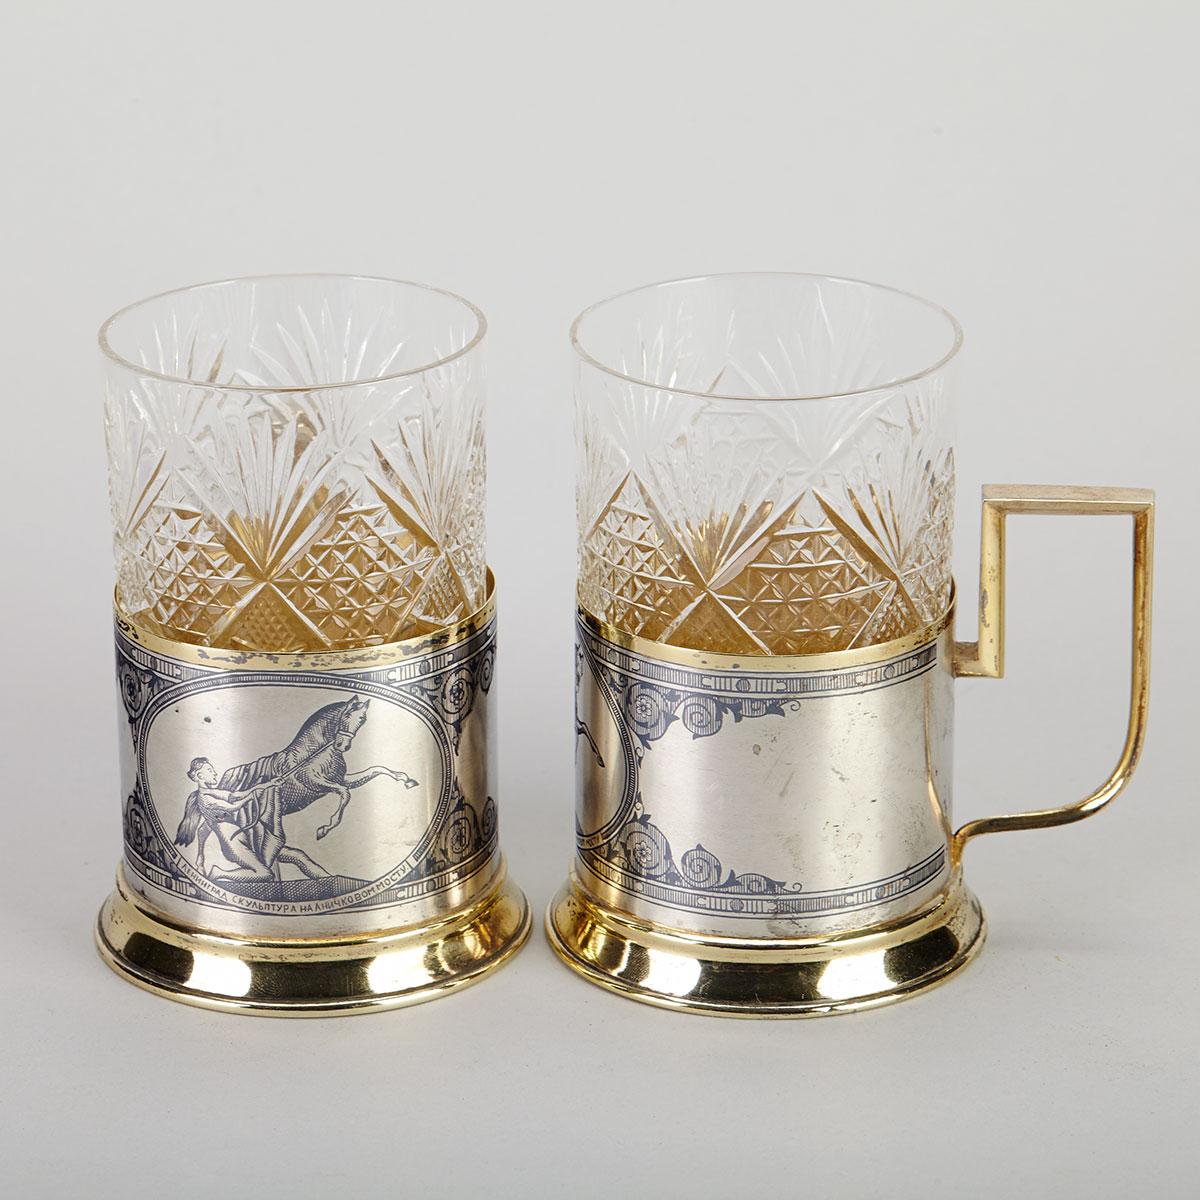 Pair of Russian Nielloed Silver Parcel-Gilt Tea Glass Holders, mid-20th century